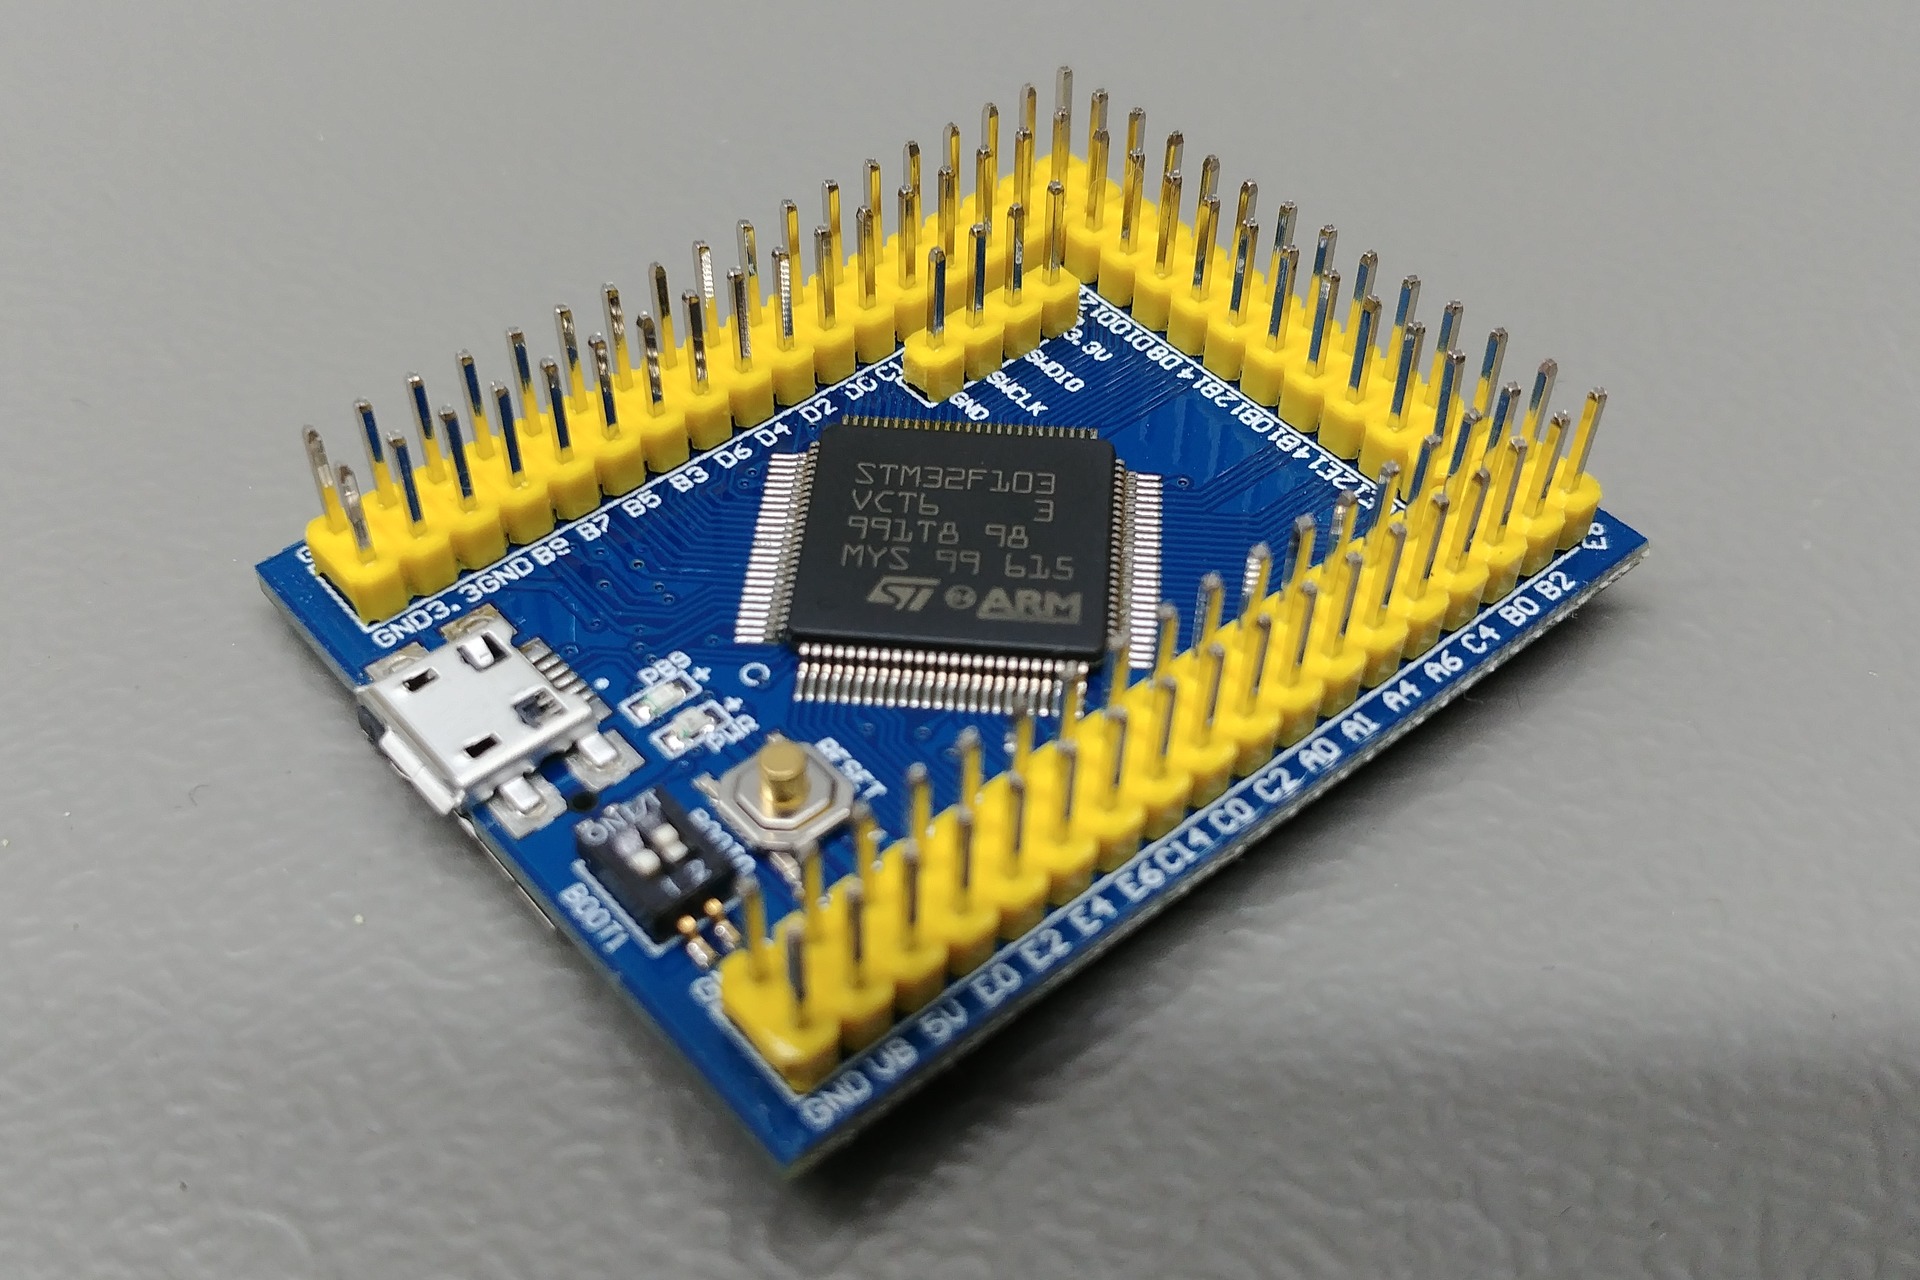 vcc-gnd.com STM32F103VCT6 mini: Perspective view